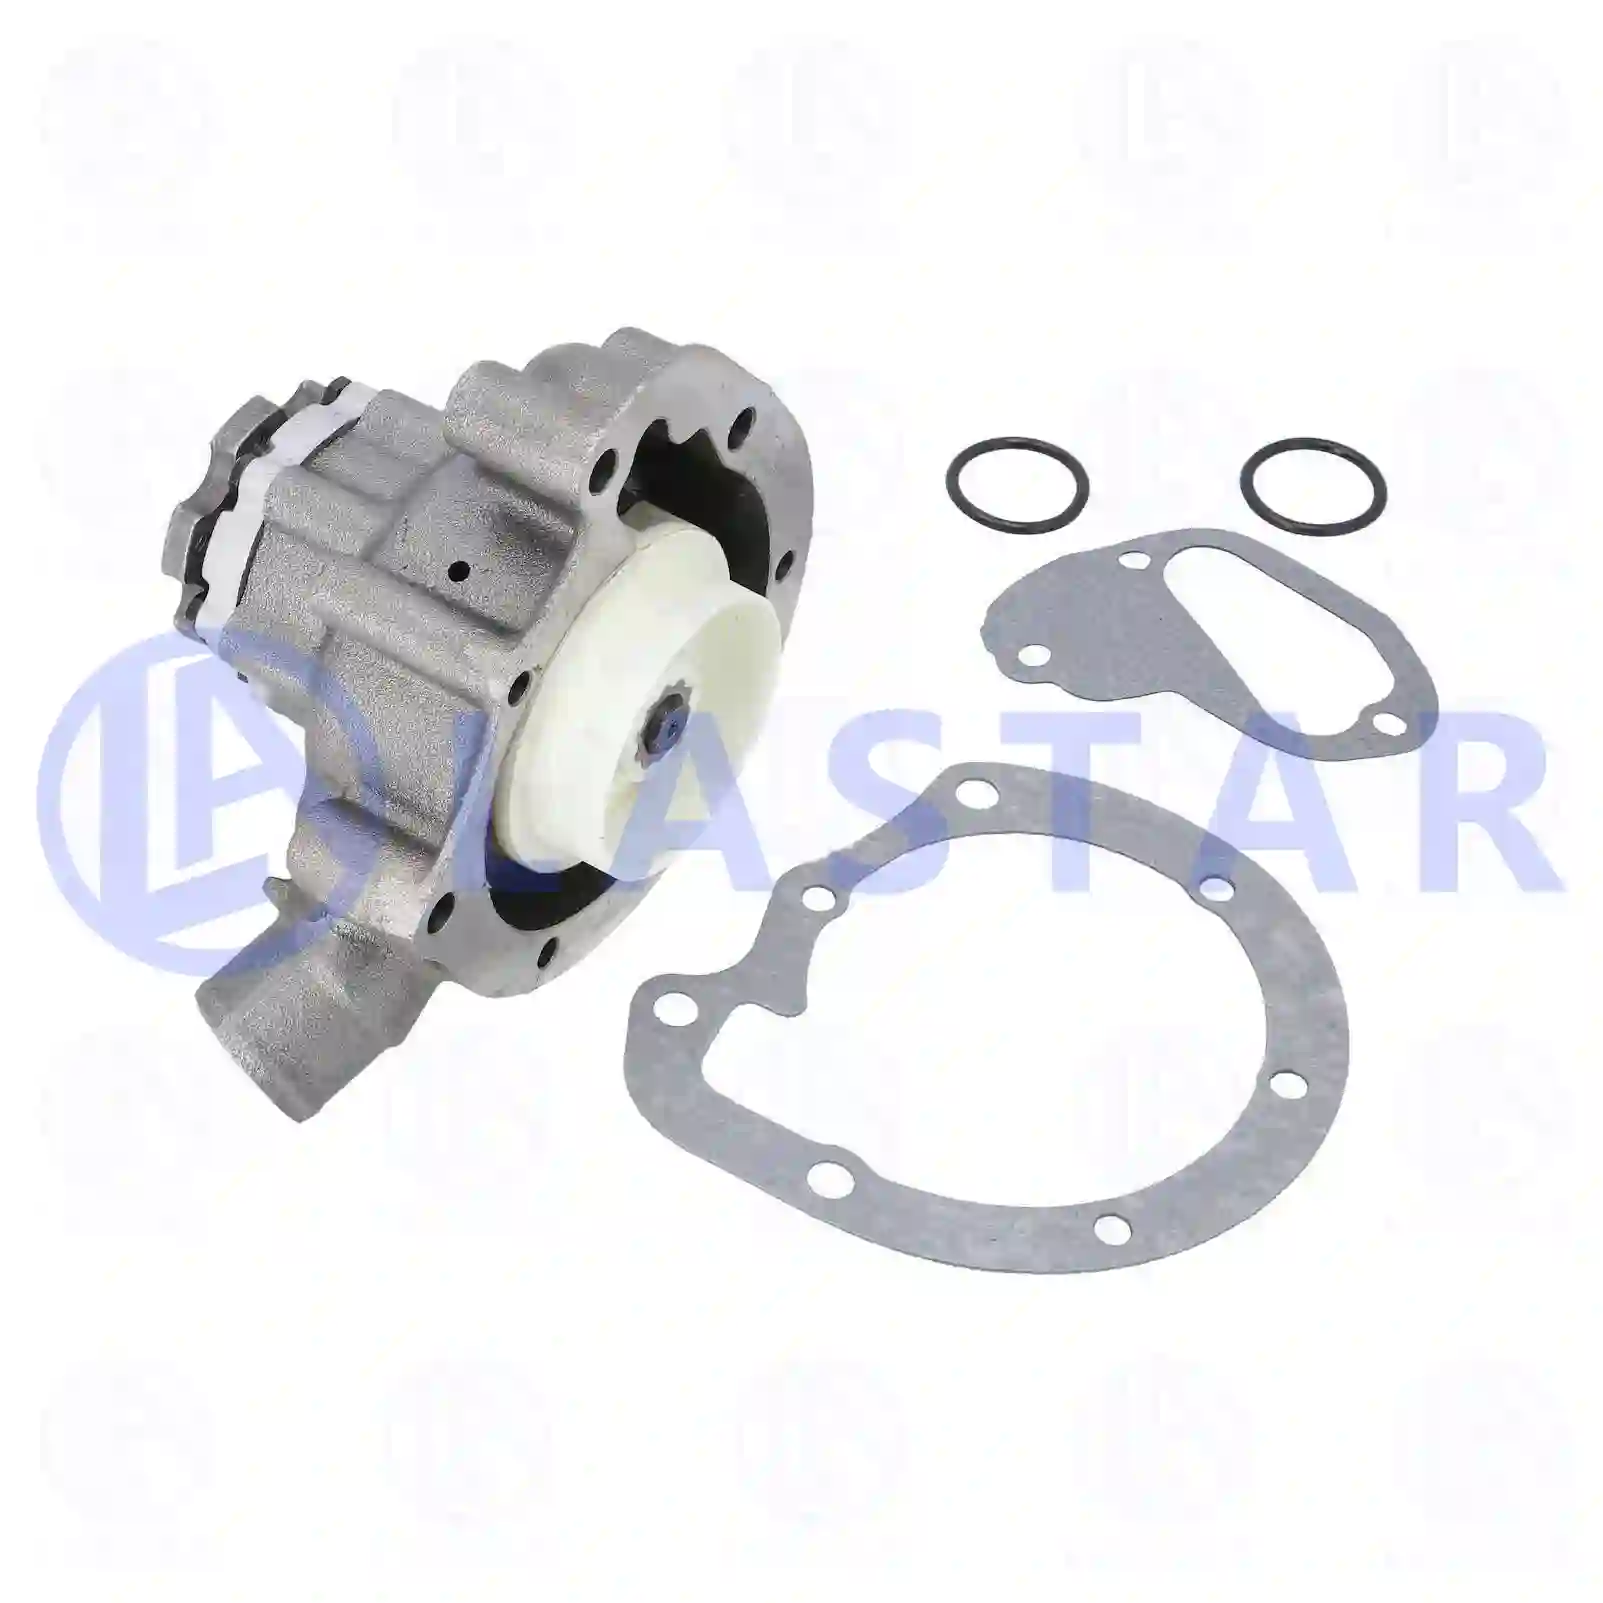 Water pump, without connection tube, 77707132, 3642000101, 3642000901, 3642002001, 364200200180 ||  77707132 Lastar Spare Part | Truck Spare Parts, Auotomotive Spare Parts Water pump, without connection tube, 77707132, 3642000101, 3642000901, 3642002001, 364200200180 ||  77707132 Lastar Spare Part | Truck Spare Parts, Auotomotive Spare Parts